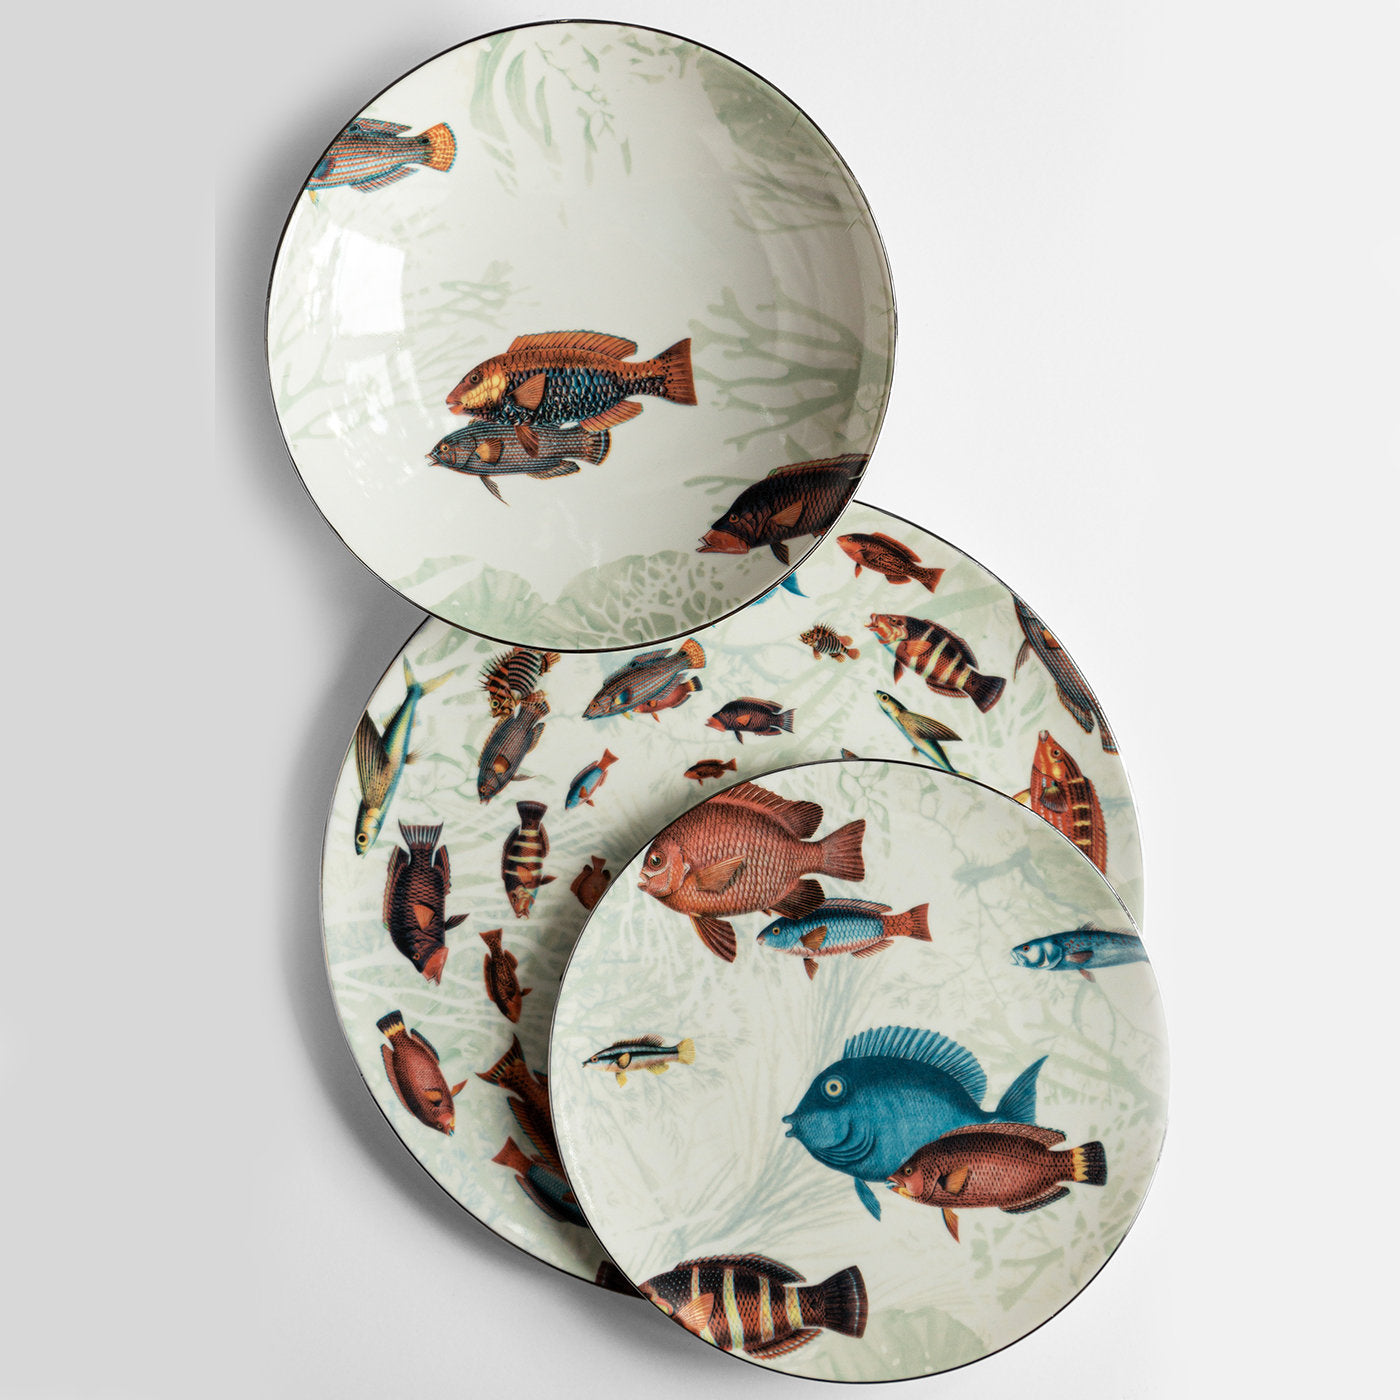 Amami Porcelain Soup Plate With Tropical Fish #1 - Alternative view 1